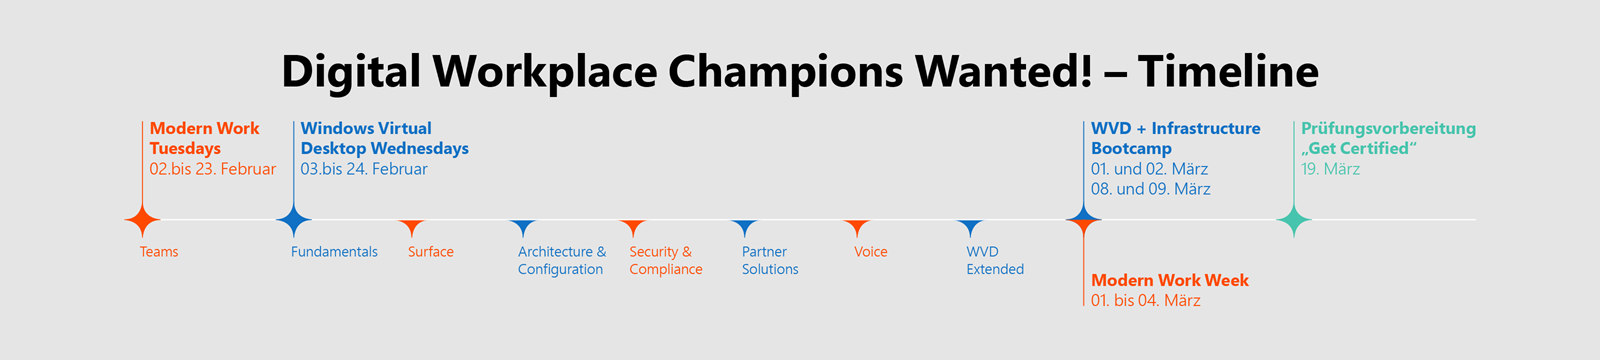 timeline showcasing events from the Digital Workplace Champions Wanted campaign